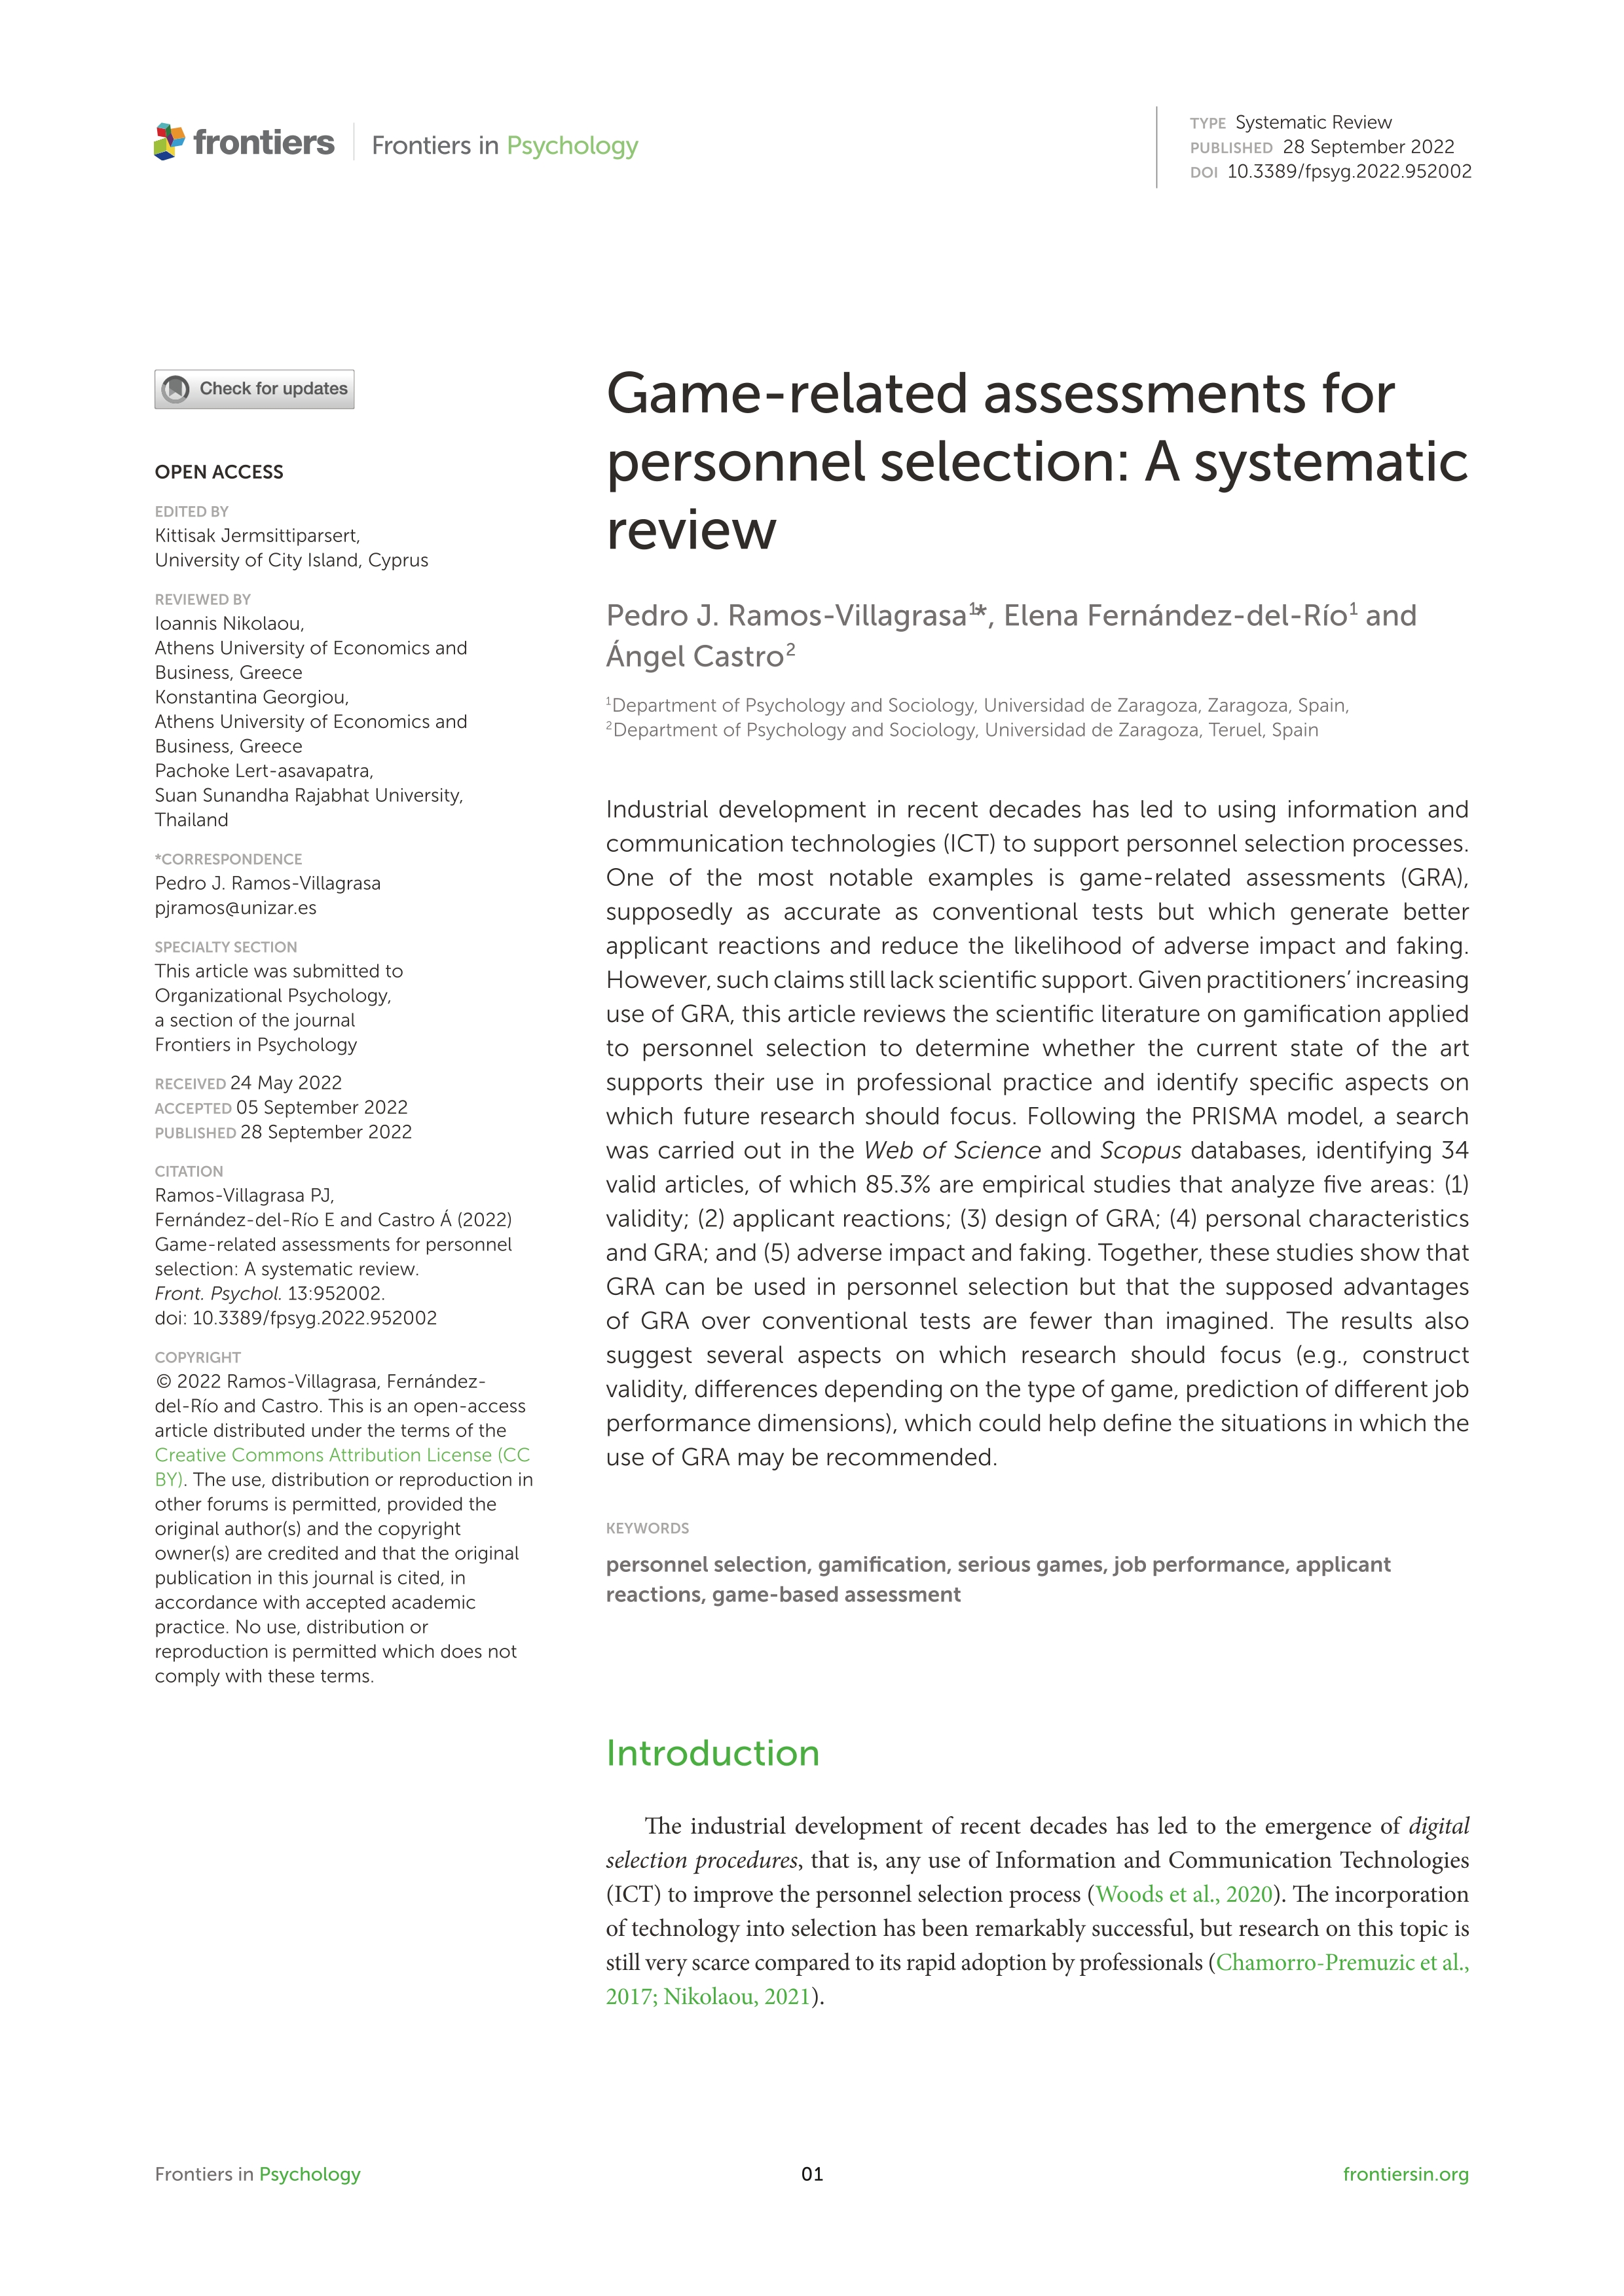 Game-related assessments for personnel selection: A systematic review